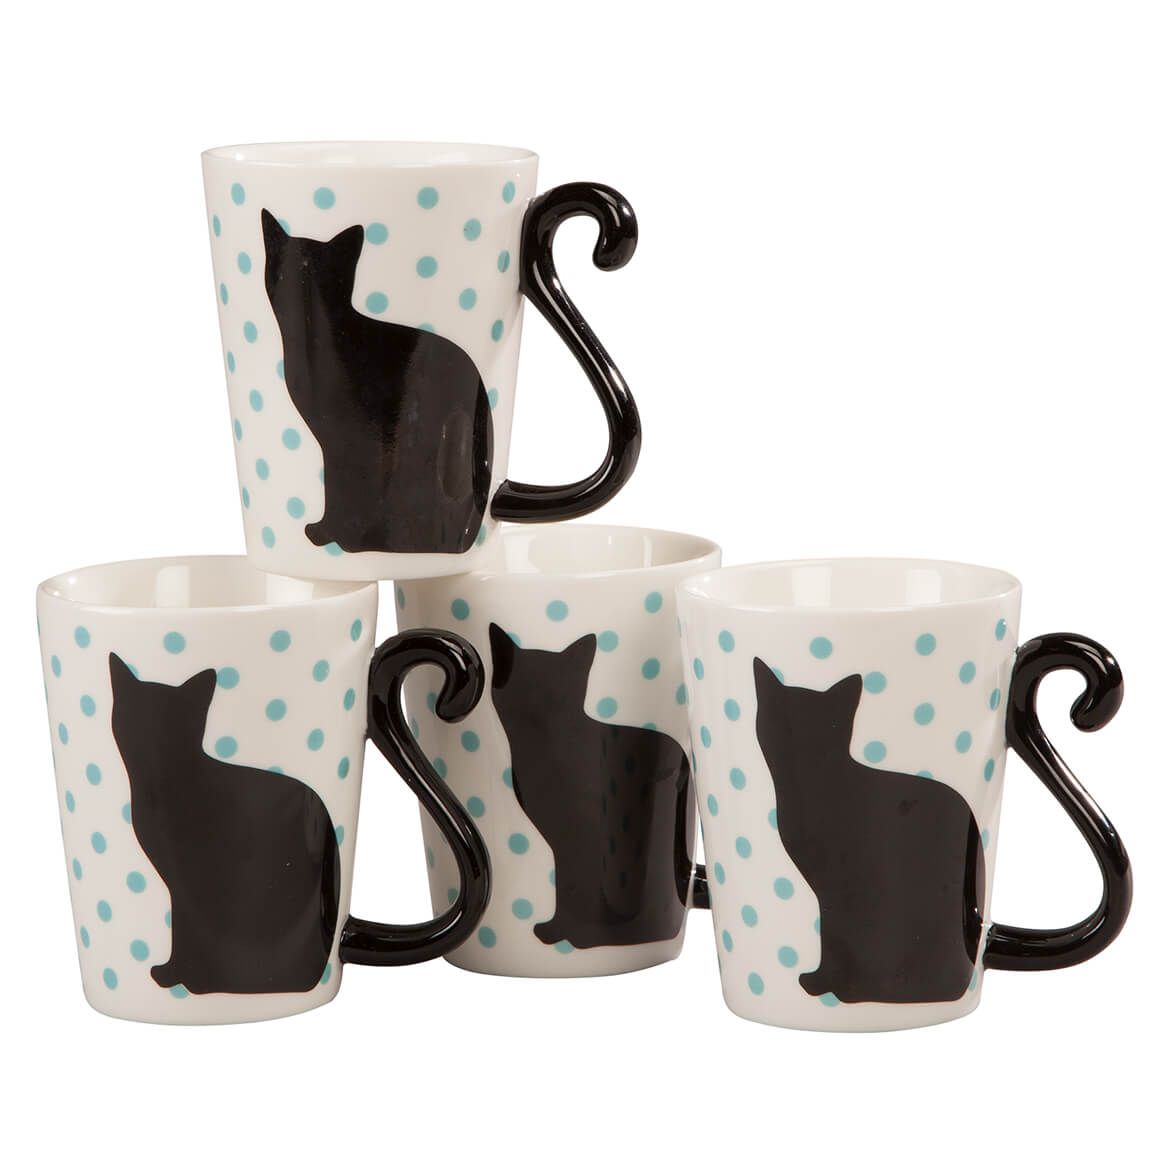 Cat Tail Mugs by Home Style Kitchen, Set of 4 + '-' + 363393